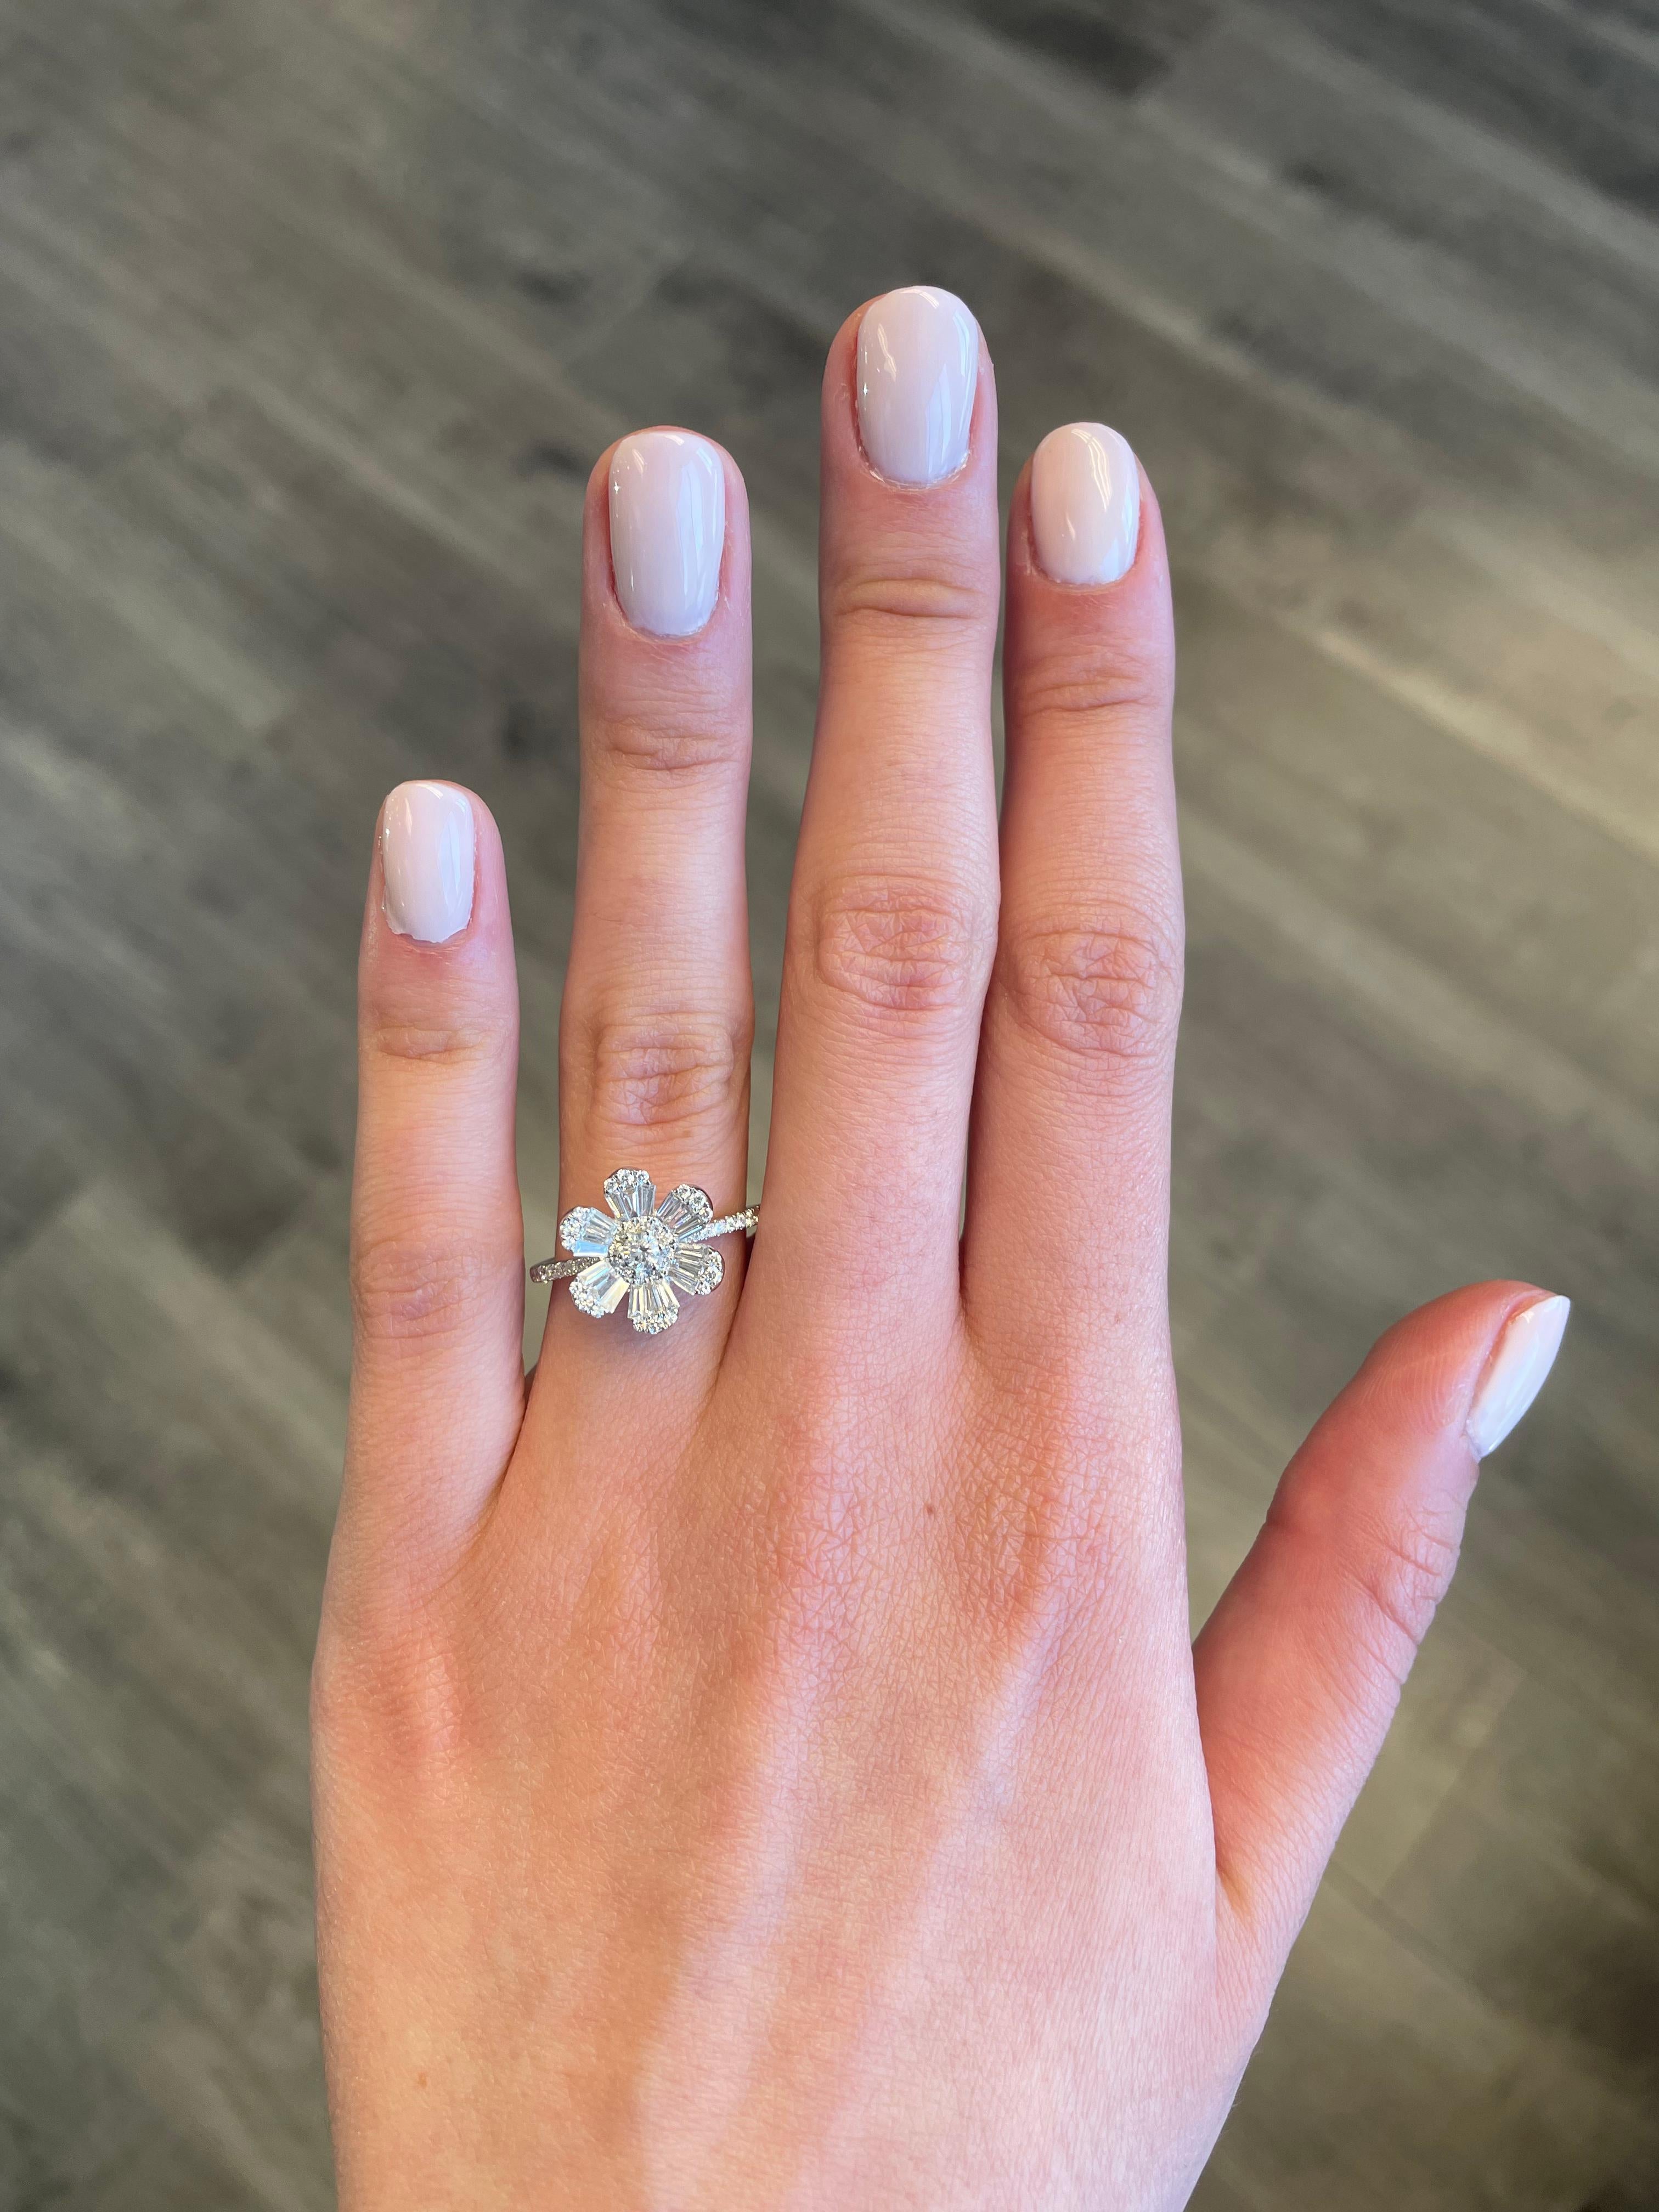 Modern illusion set diamond floral ring with tapered baguette diamonds, by Alexander Beverly Hills. 
65 round brilliant  and tapered baguette cut diamonds, 0.82 carats total. Approximately G/H color and VS clarity. 3.13 grams, 18-karat white